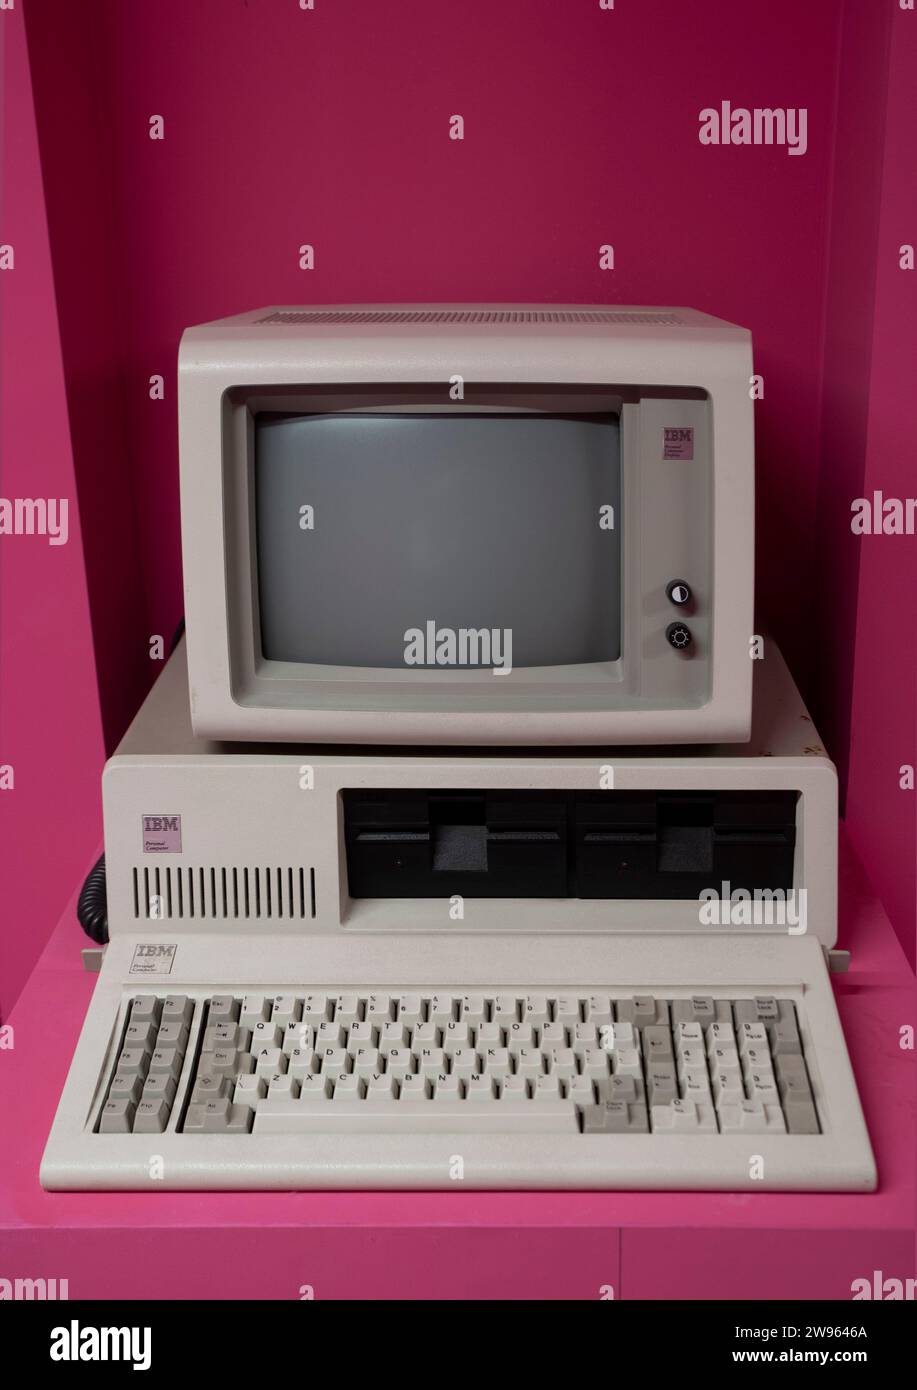 IBM personal computer (1981) is the first microcomputer released in the IBM PC model line. Pink background.. Stock Photo